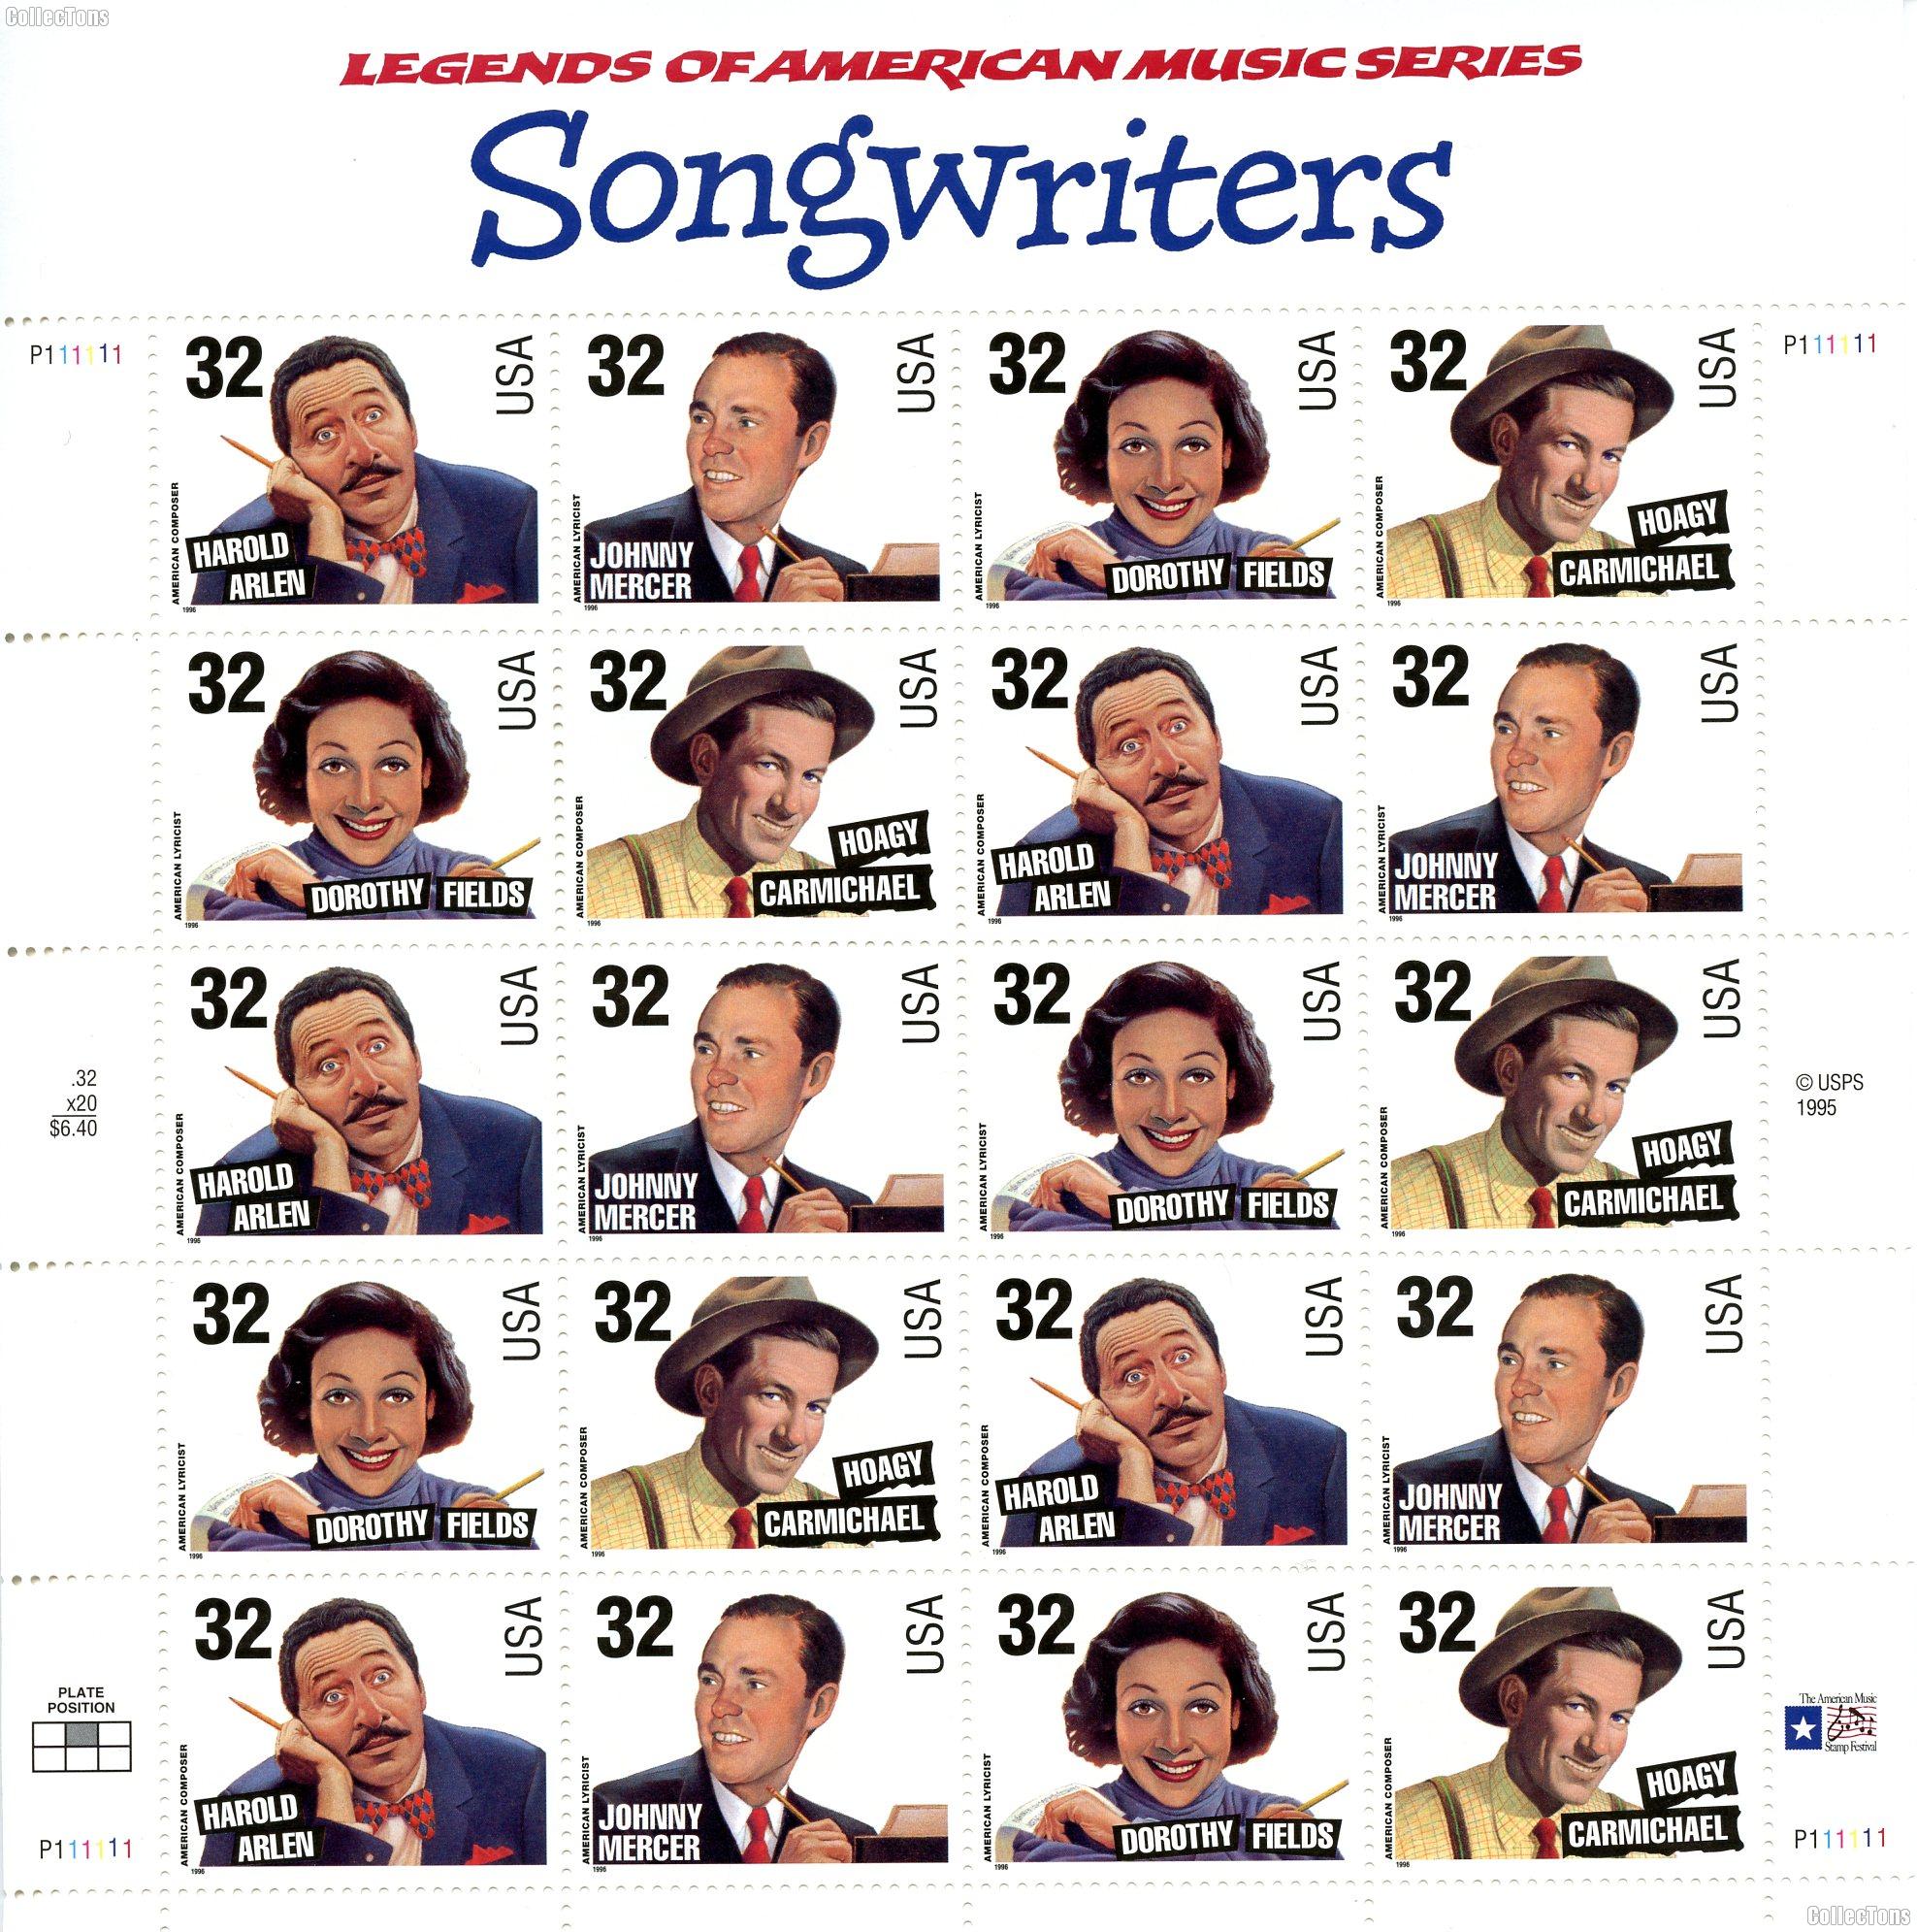 1996 Songwriters 32 Cent US Postage Stamp MNH Sheet of 20 Scott #3100-3103